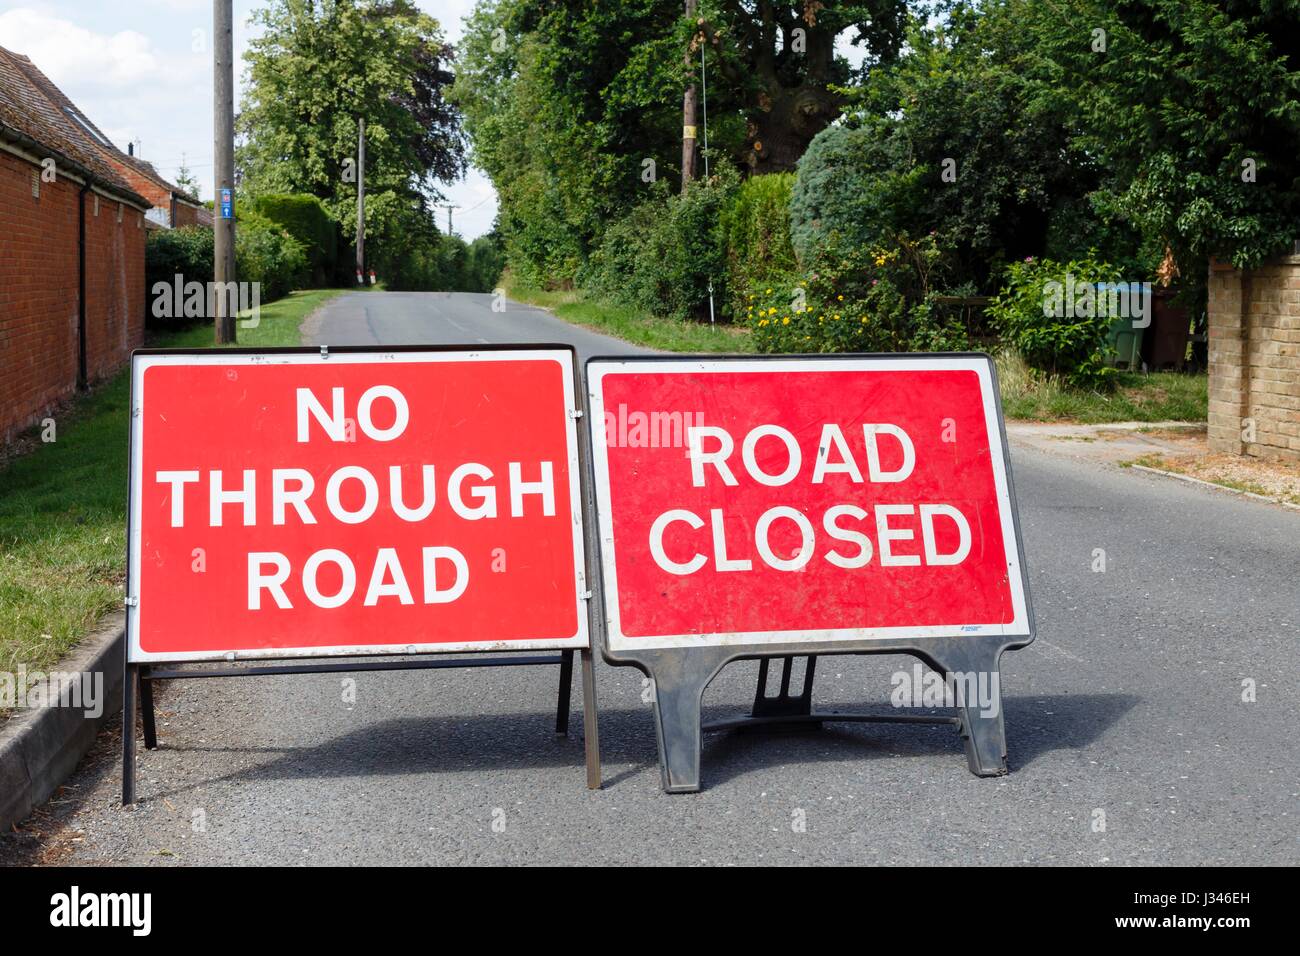 Road signs showing a street closed in the UK Stock Photo